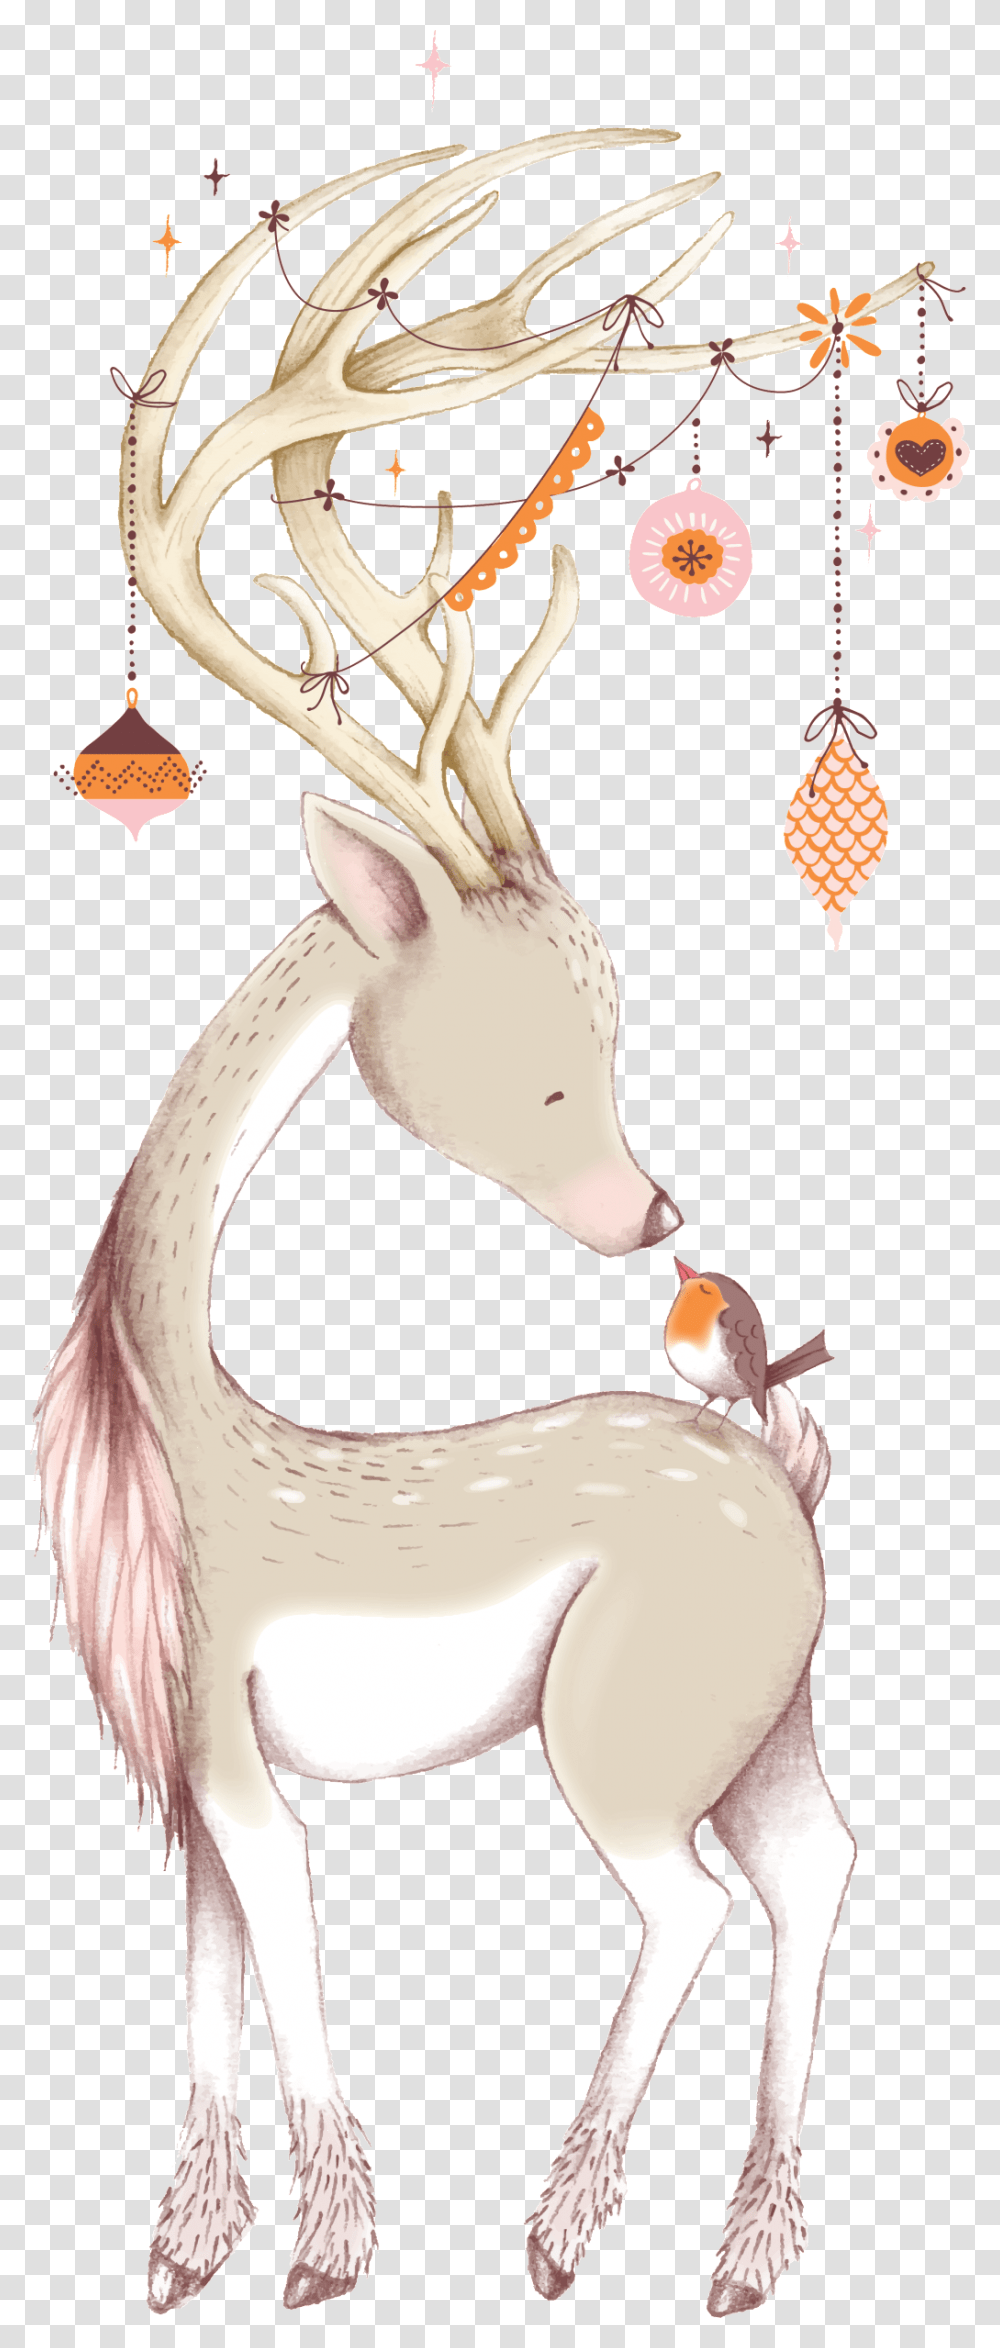 Cute Christmas Deer Ornaments Amp Oval Ornament Christmas Picture Cute, Animal, Mammal, Sweets, Food Transparent Png